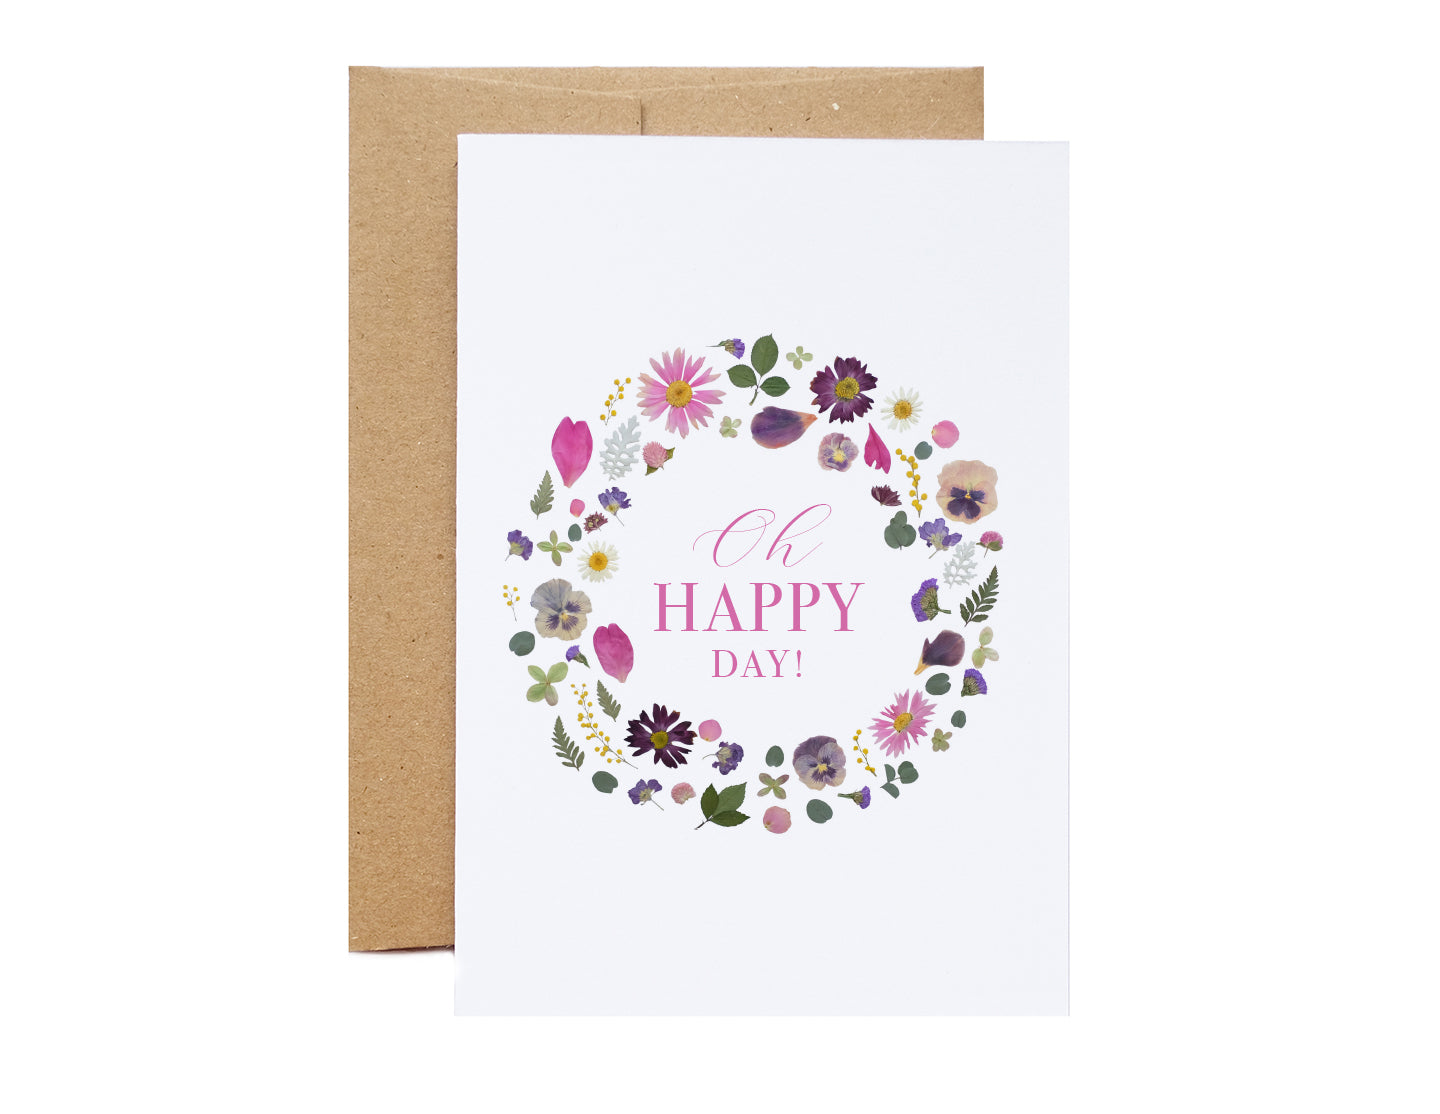 Oh Happy Day, Colourful Pressed Flower Wreath, Large Card